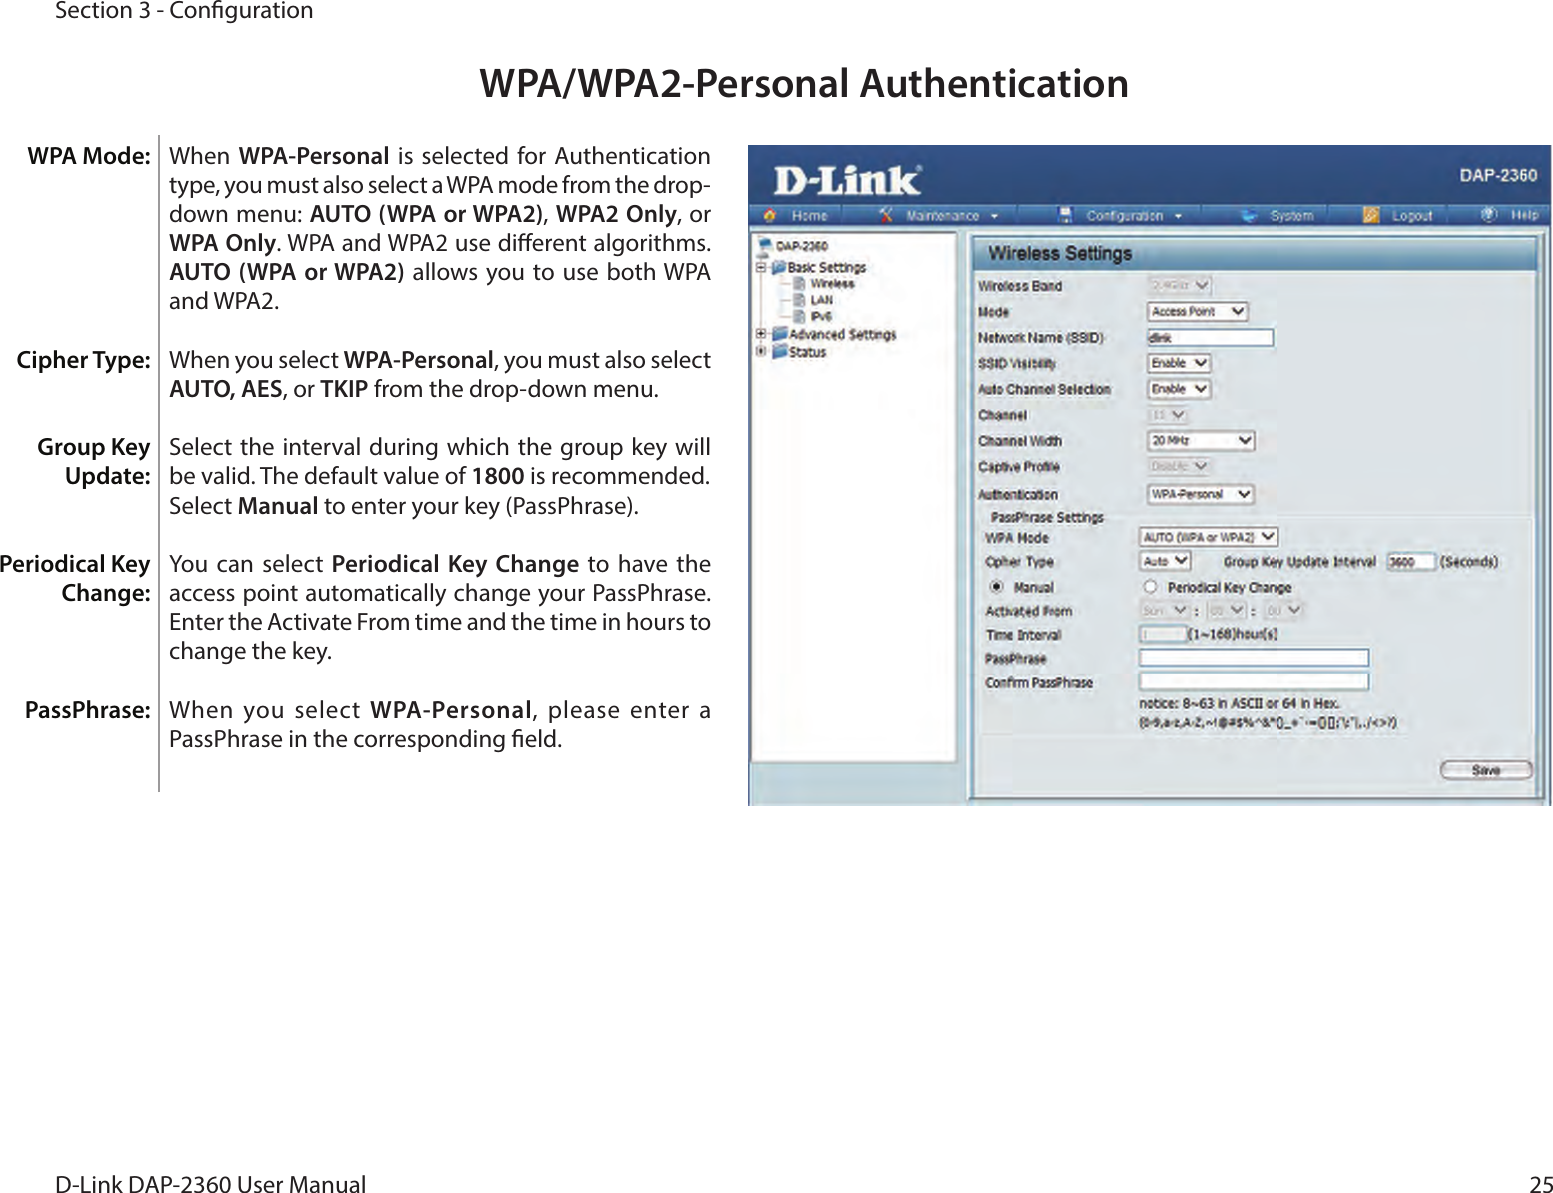 25D-Link DAP-2360 User ManualSection 3 - CongurationWPA/WPA2-Personal AuthenticationWhen WPA-Personal is selected for Authentication type, you must also select a WPA mode from the drop-down menu: AUTO (WPA or WPA2), WPA2 Only, or WPA Only. WPA and WPA2 use dierent algorithms. AUTO (WPA or WPA2) allows you to use  both WPA and WPA2.When you select WPA-Personal, you must also select AUTO, AES, or TKIP from the drop-down menu.Select the interval during which the group key will be valid. The default value of 1800 is recommended.Select Manual to enter your key (PassPhrase). You can  select  Periodical Key Change to  have  the access point automatically change your PassPhrase. Enter the Activate From time and the time in hours to change the key.When you select  WPA-Personal, please enter a PassPhrase in the corresponding eld.WPA Mode: Cipher Type:Group Key Update:Periodical Key Change:PassPhrase: